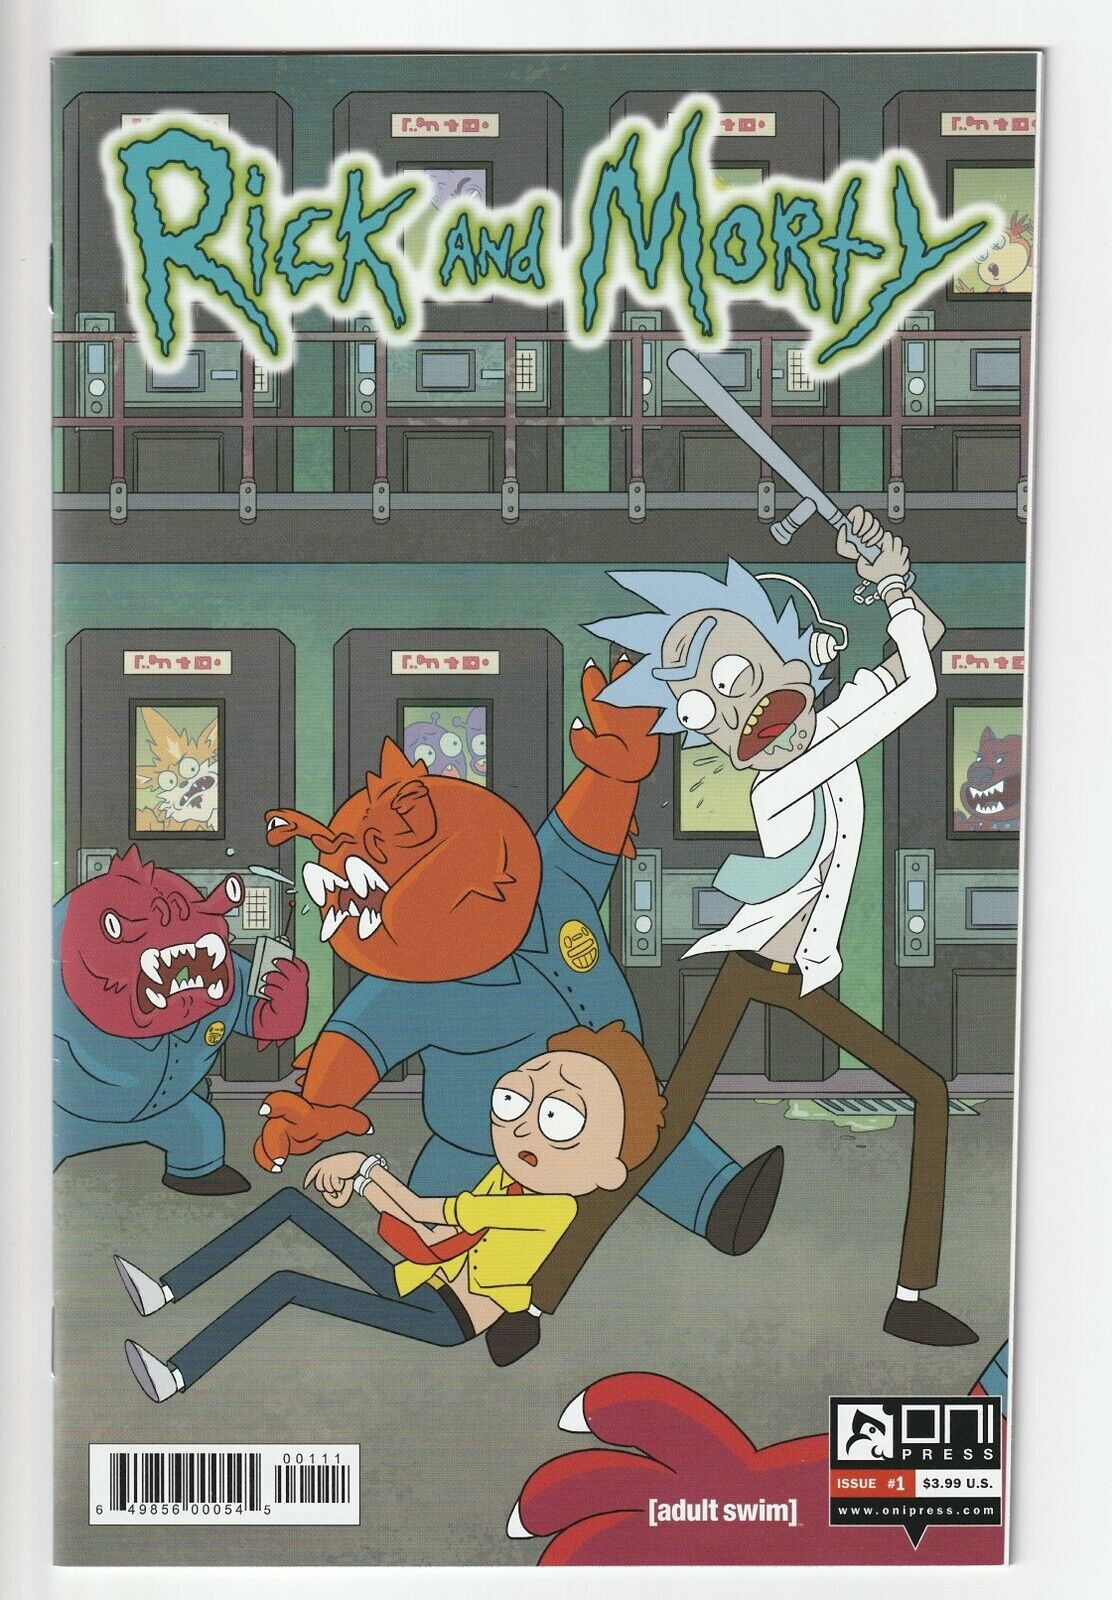 Rick and Morty #1 - First Print